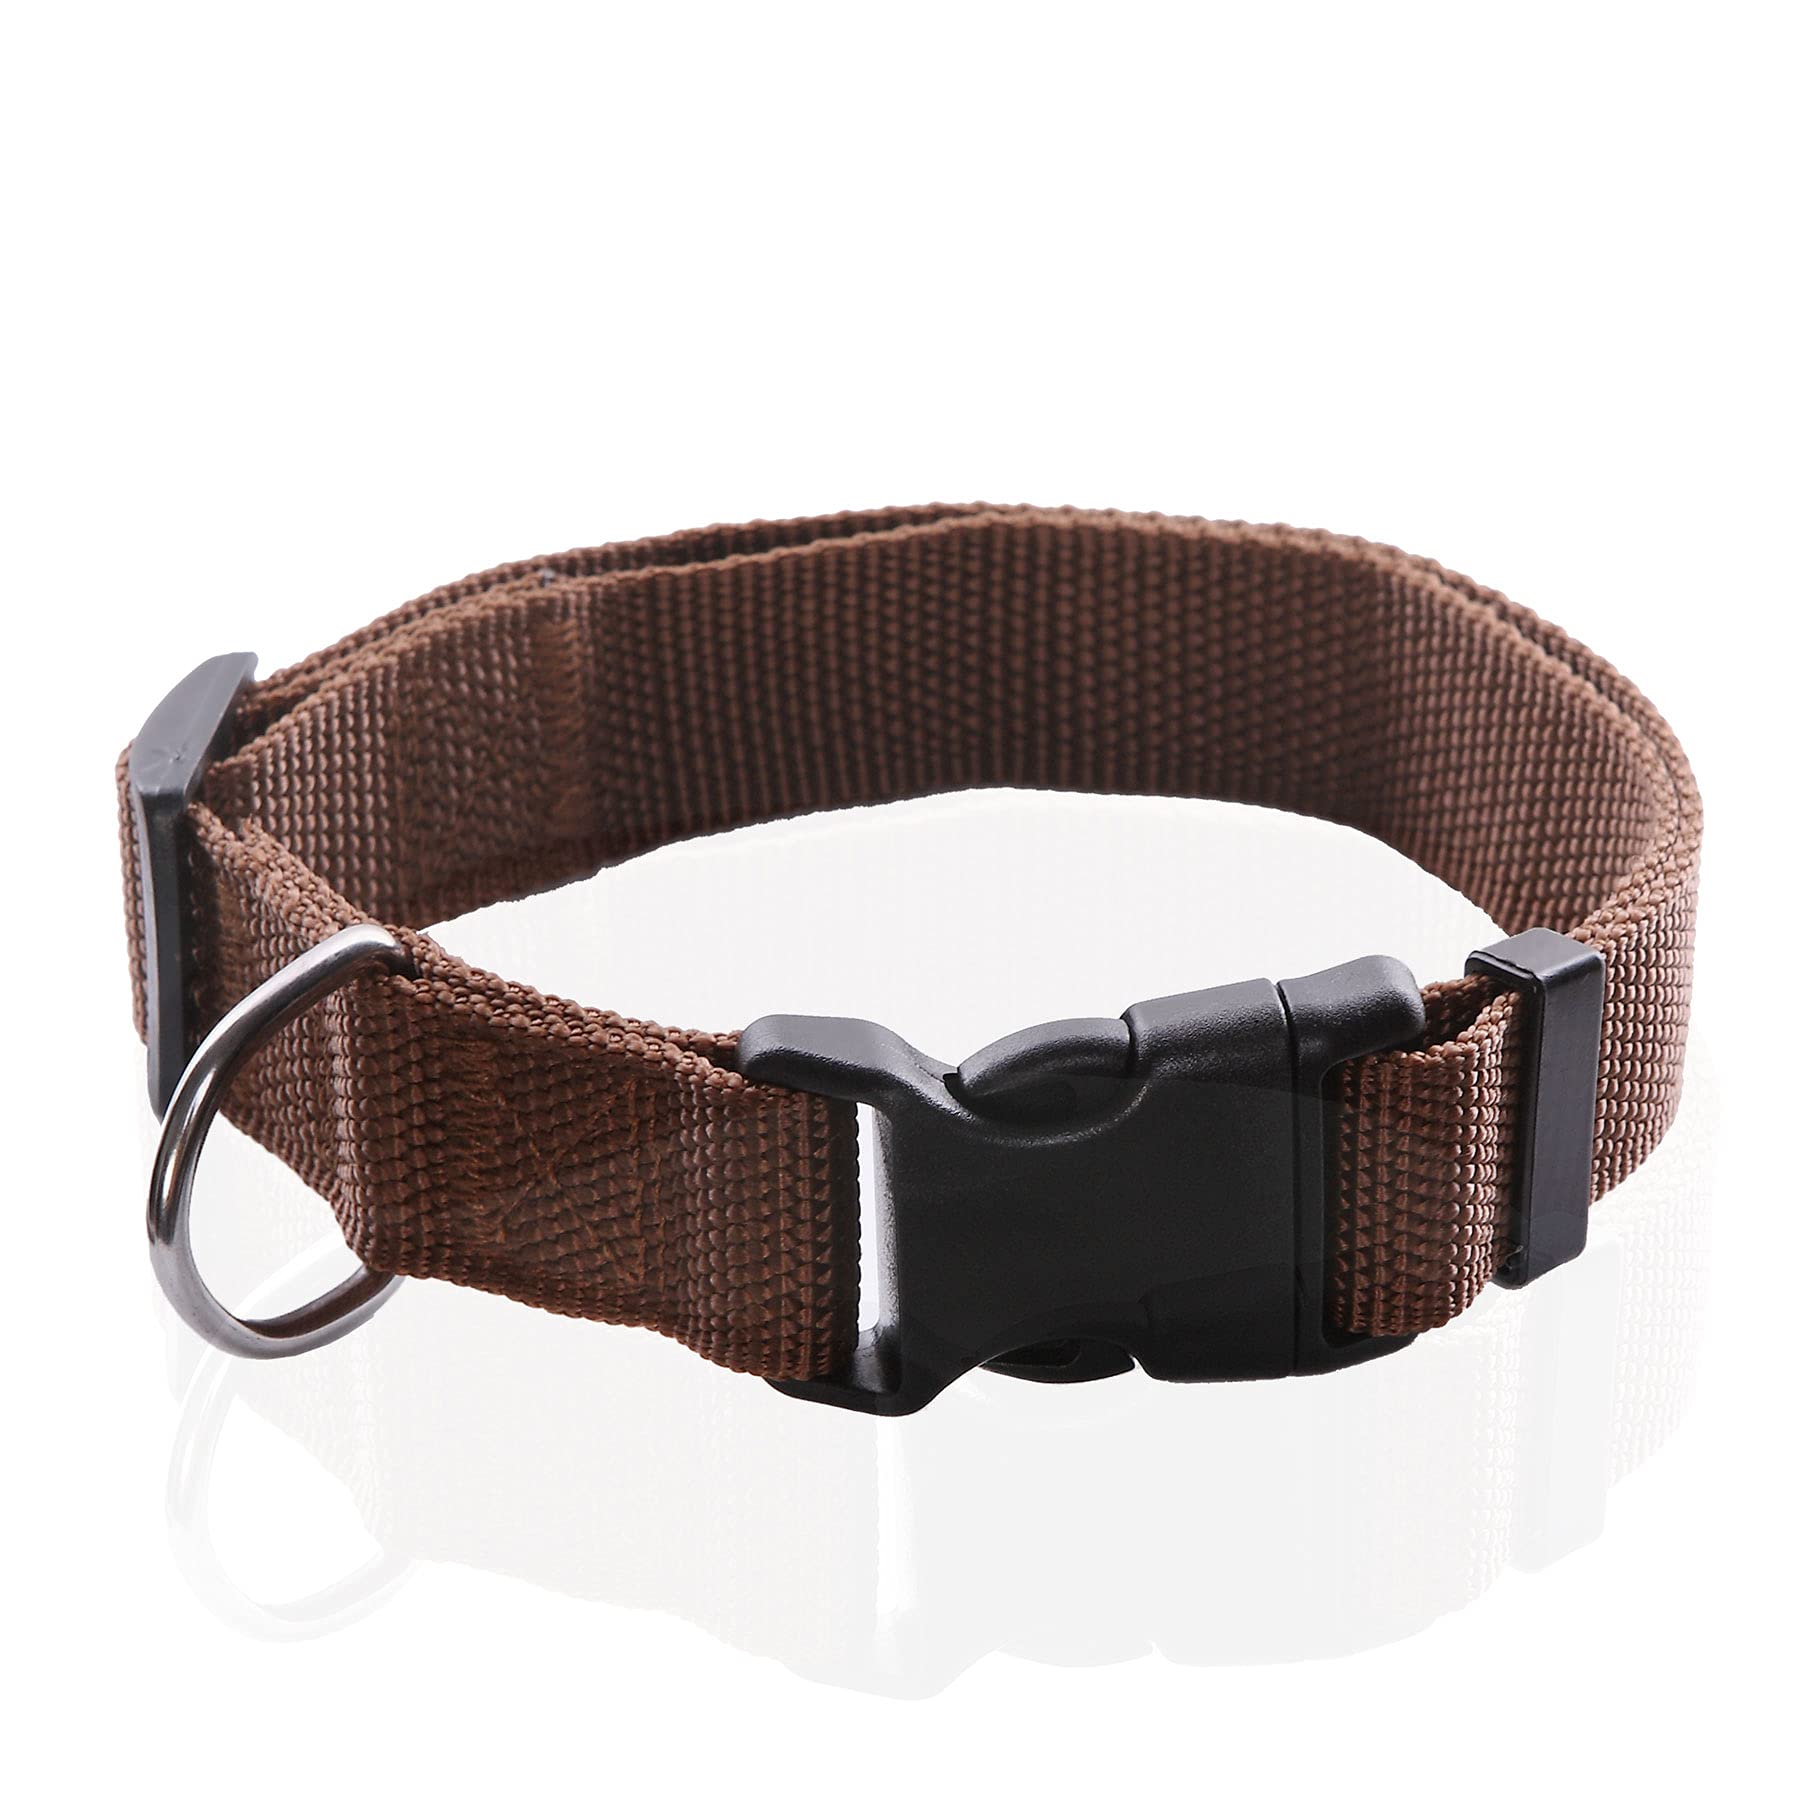 taida Adjustable Nylon Dog Collar, Durable Pet Collar 1 Inch 34 Inch 58 Inch Wide, For Large Medium Small Dogs (S( 58 X 11-16), Brown)